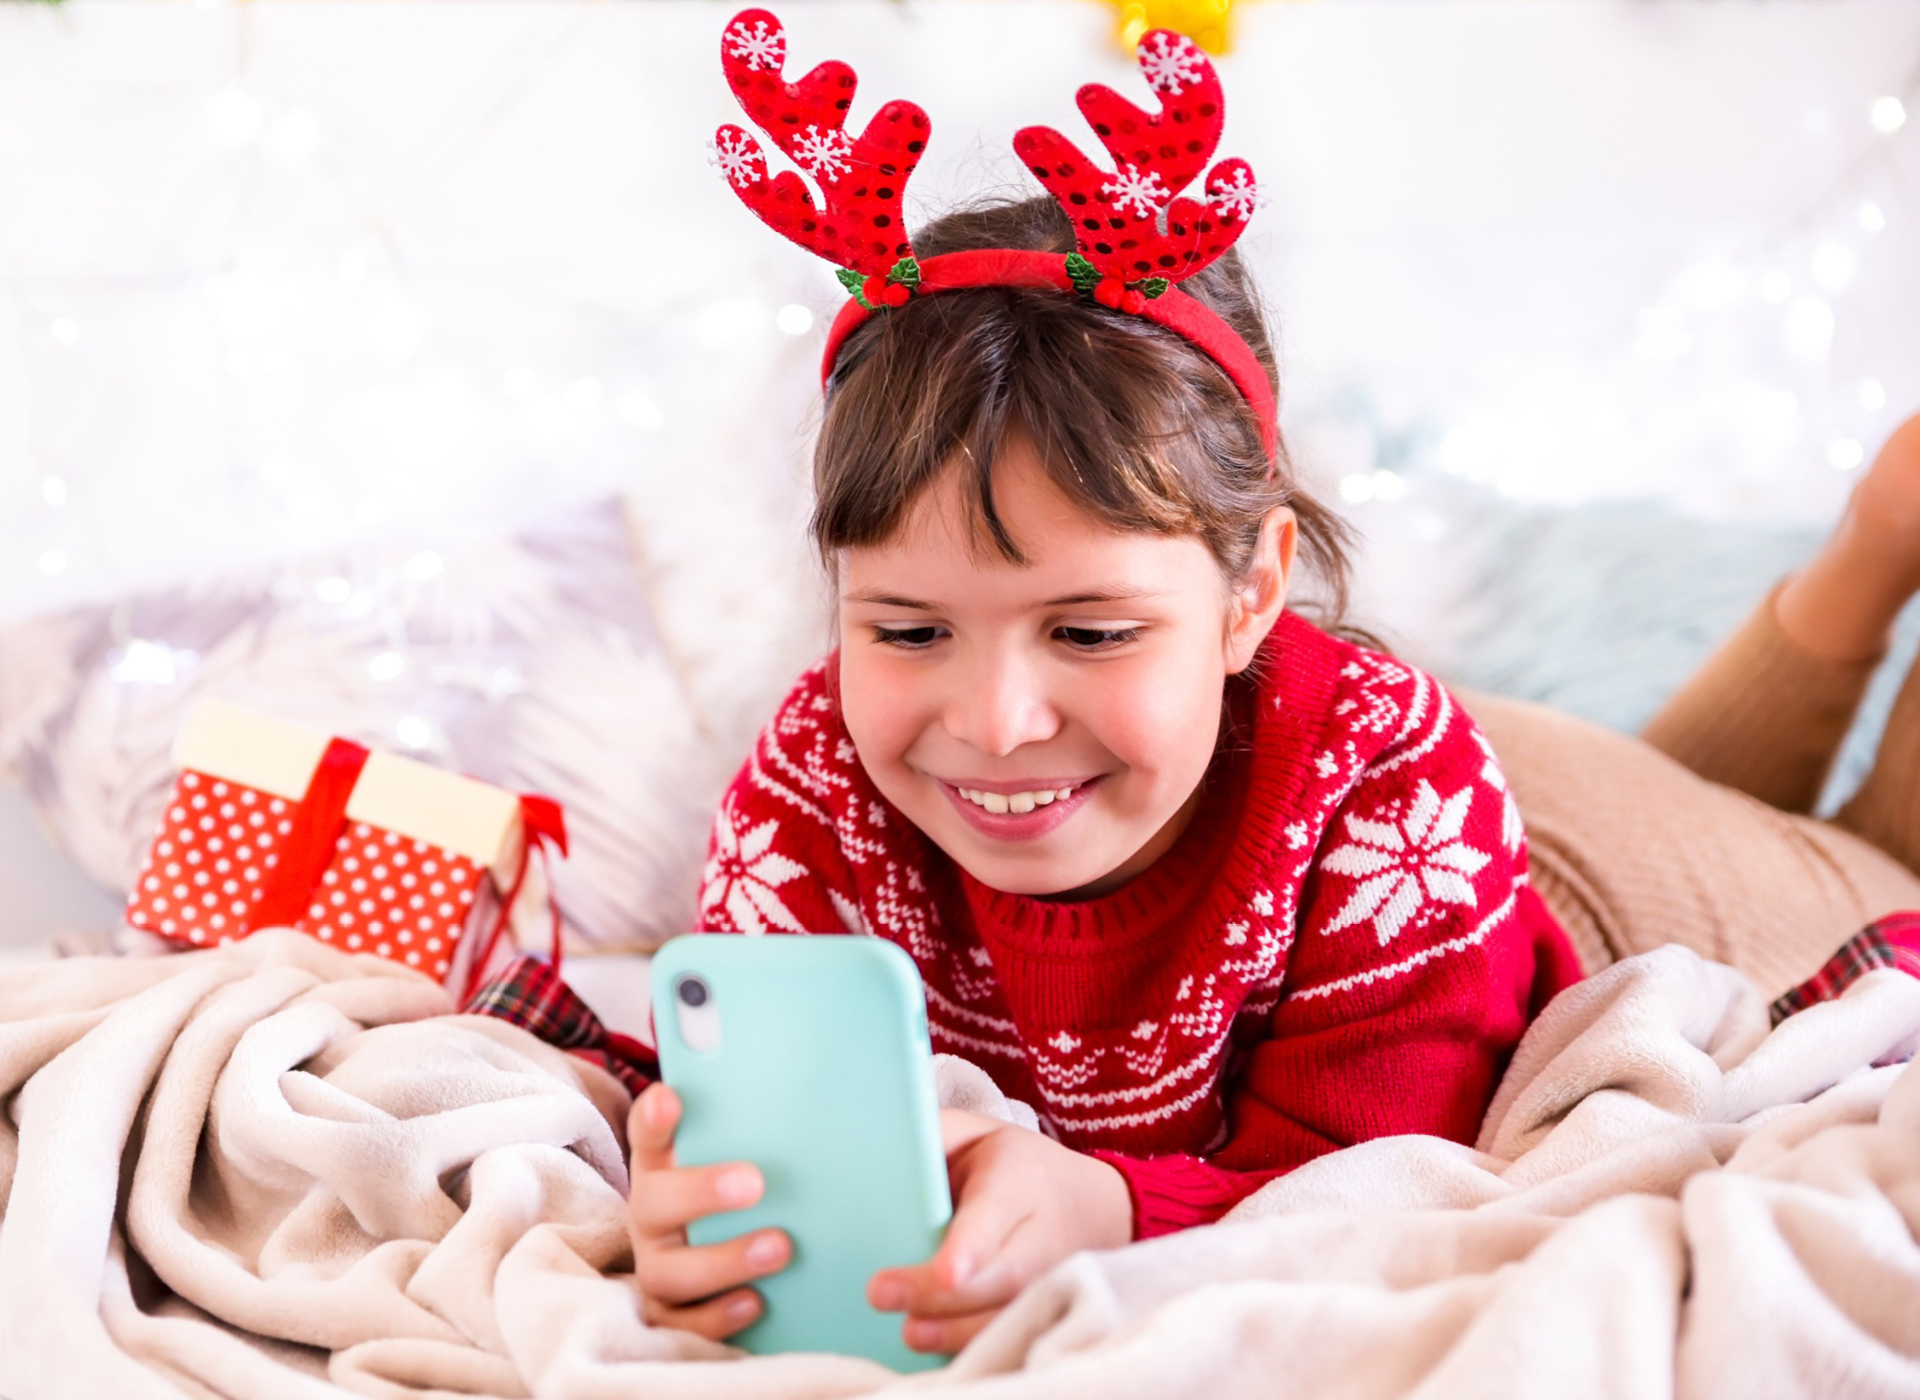 little girl with brown hair and red sweater looking at smartphone smiling